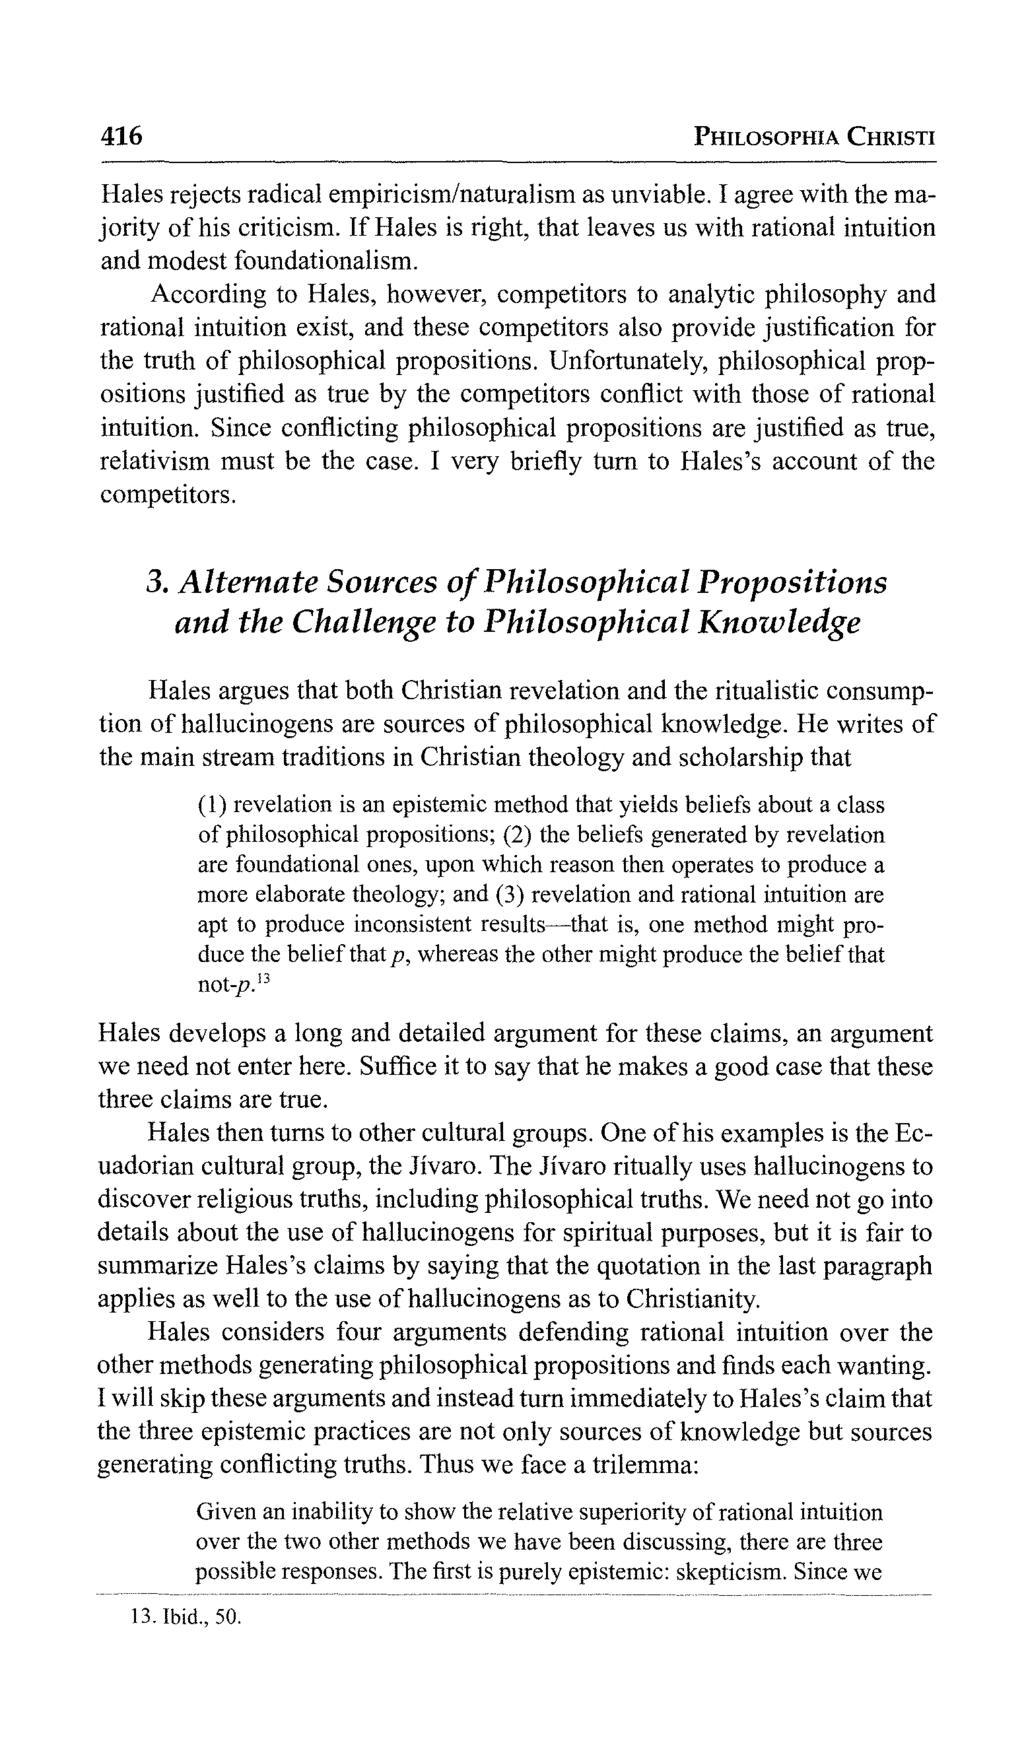 416 PHILOSOPHIA CHRISTI Hales rejects radical empiricism/naturalism as unviable. I agree with the majority of his criticism.